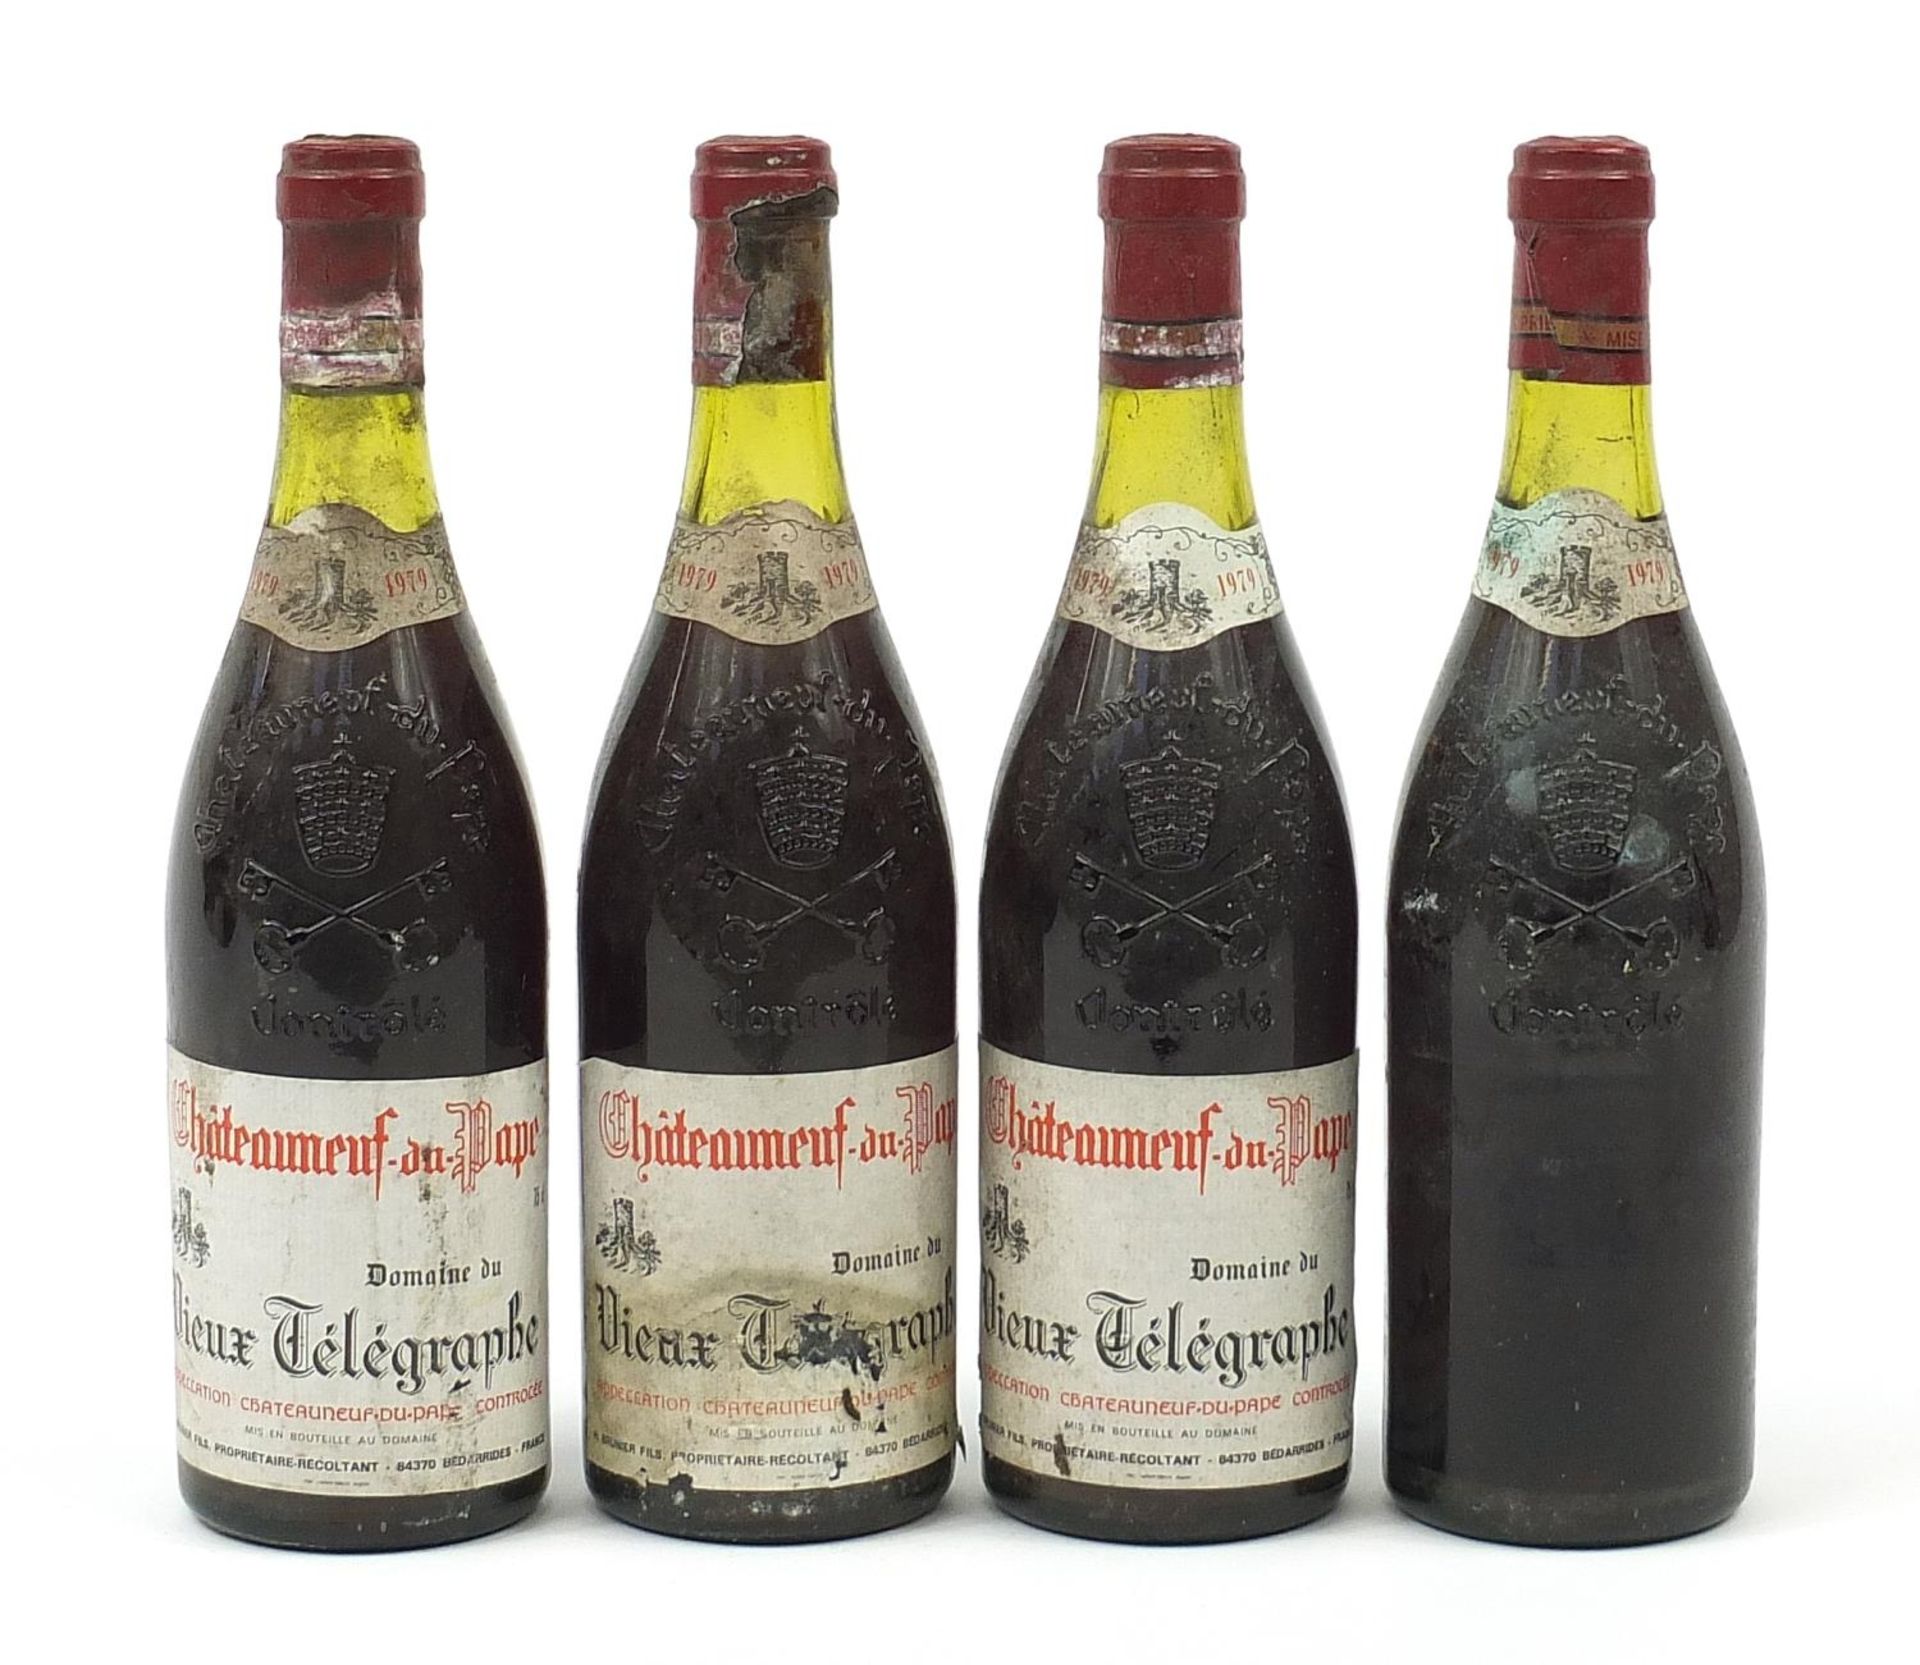 Four bottles of 1979 Vieux Telegraphe Chateauneuf du Pape red wine